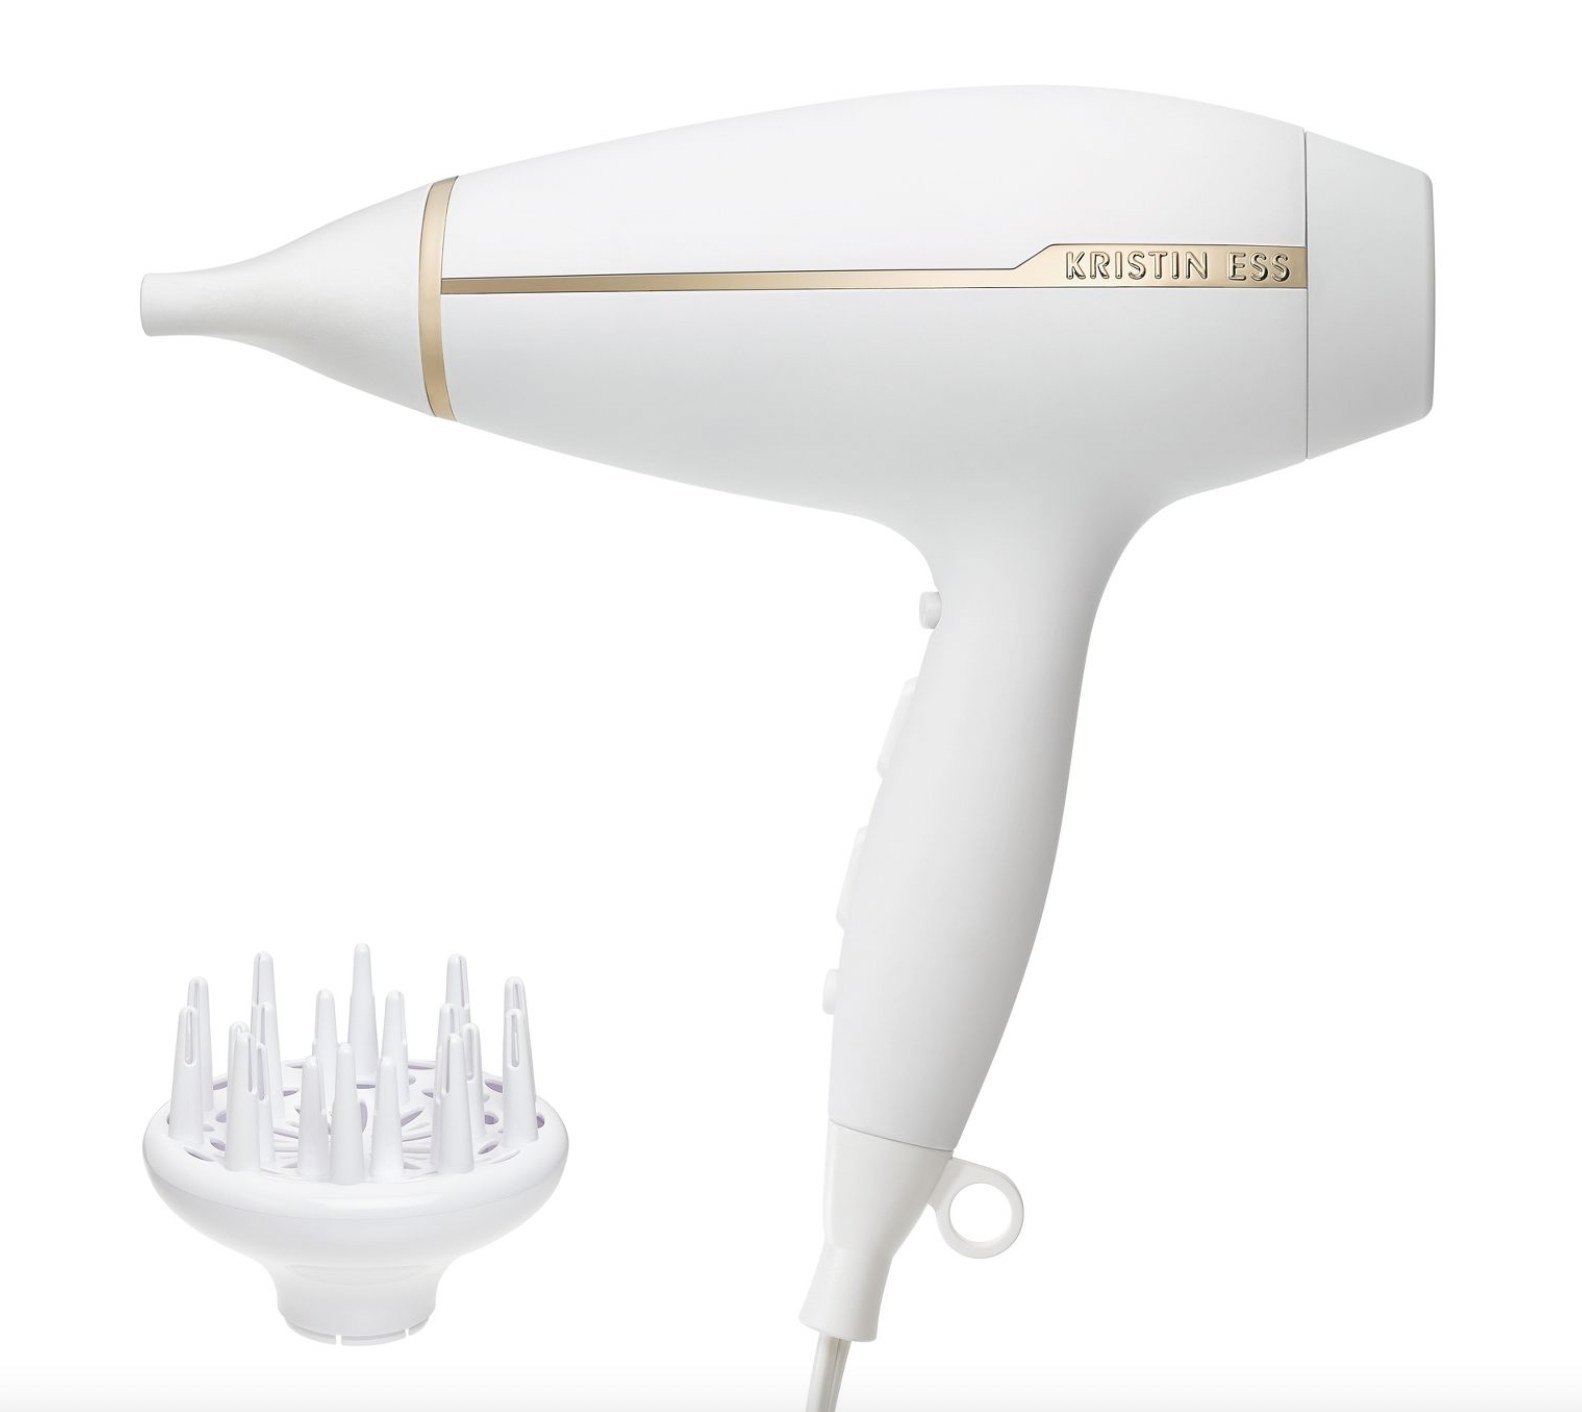 A white blow-dryer with a diffuser attachment